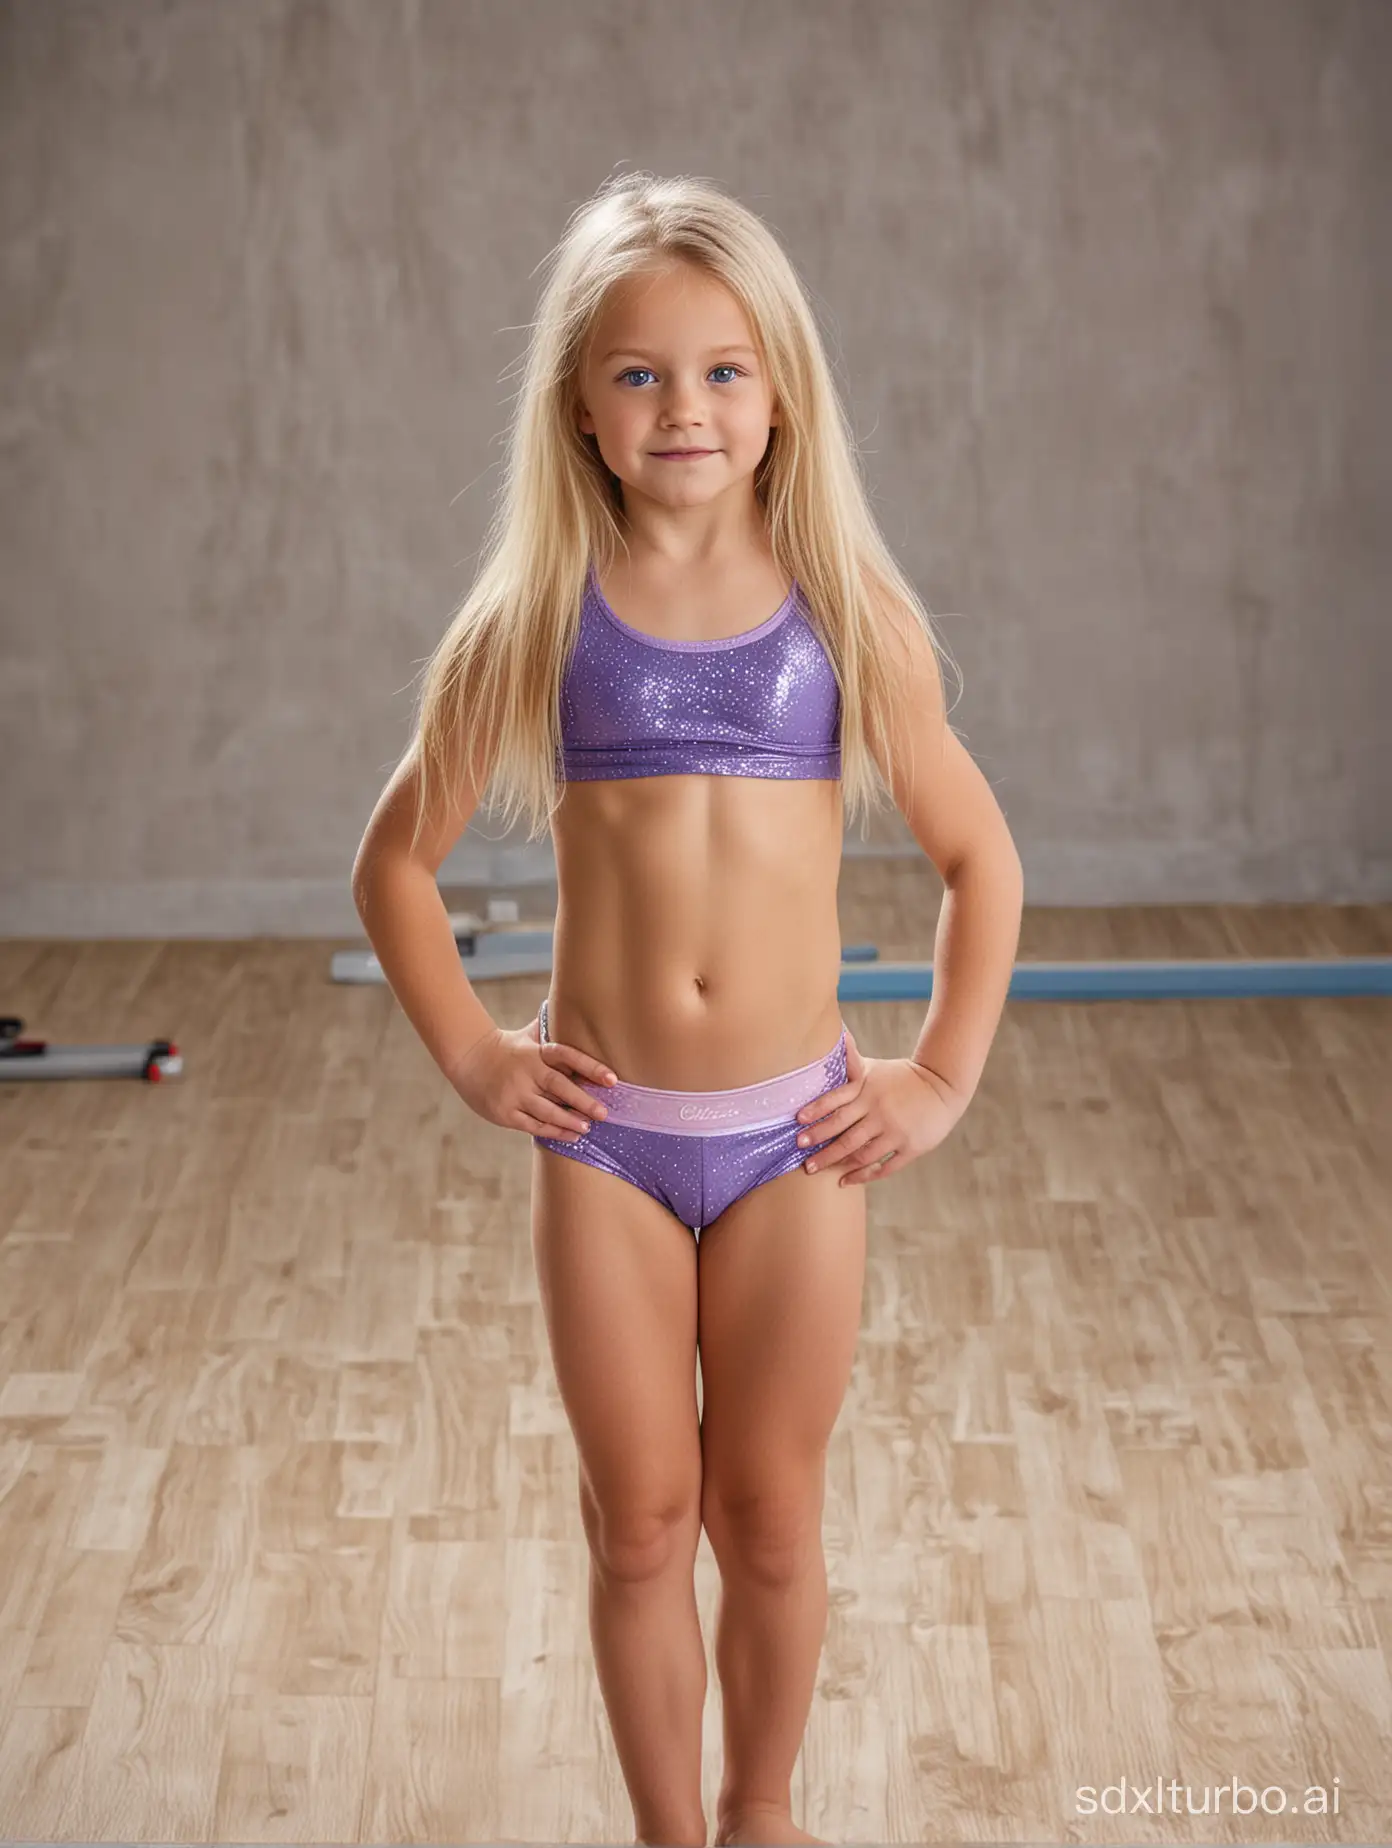 7years old girl, flat chested, very muscular abs, showing her belly, long blond hair, blue eyes, gymnastics on the beam